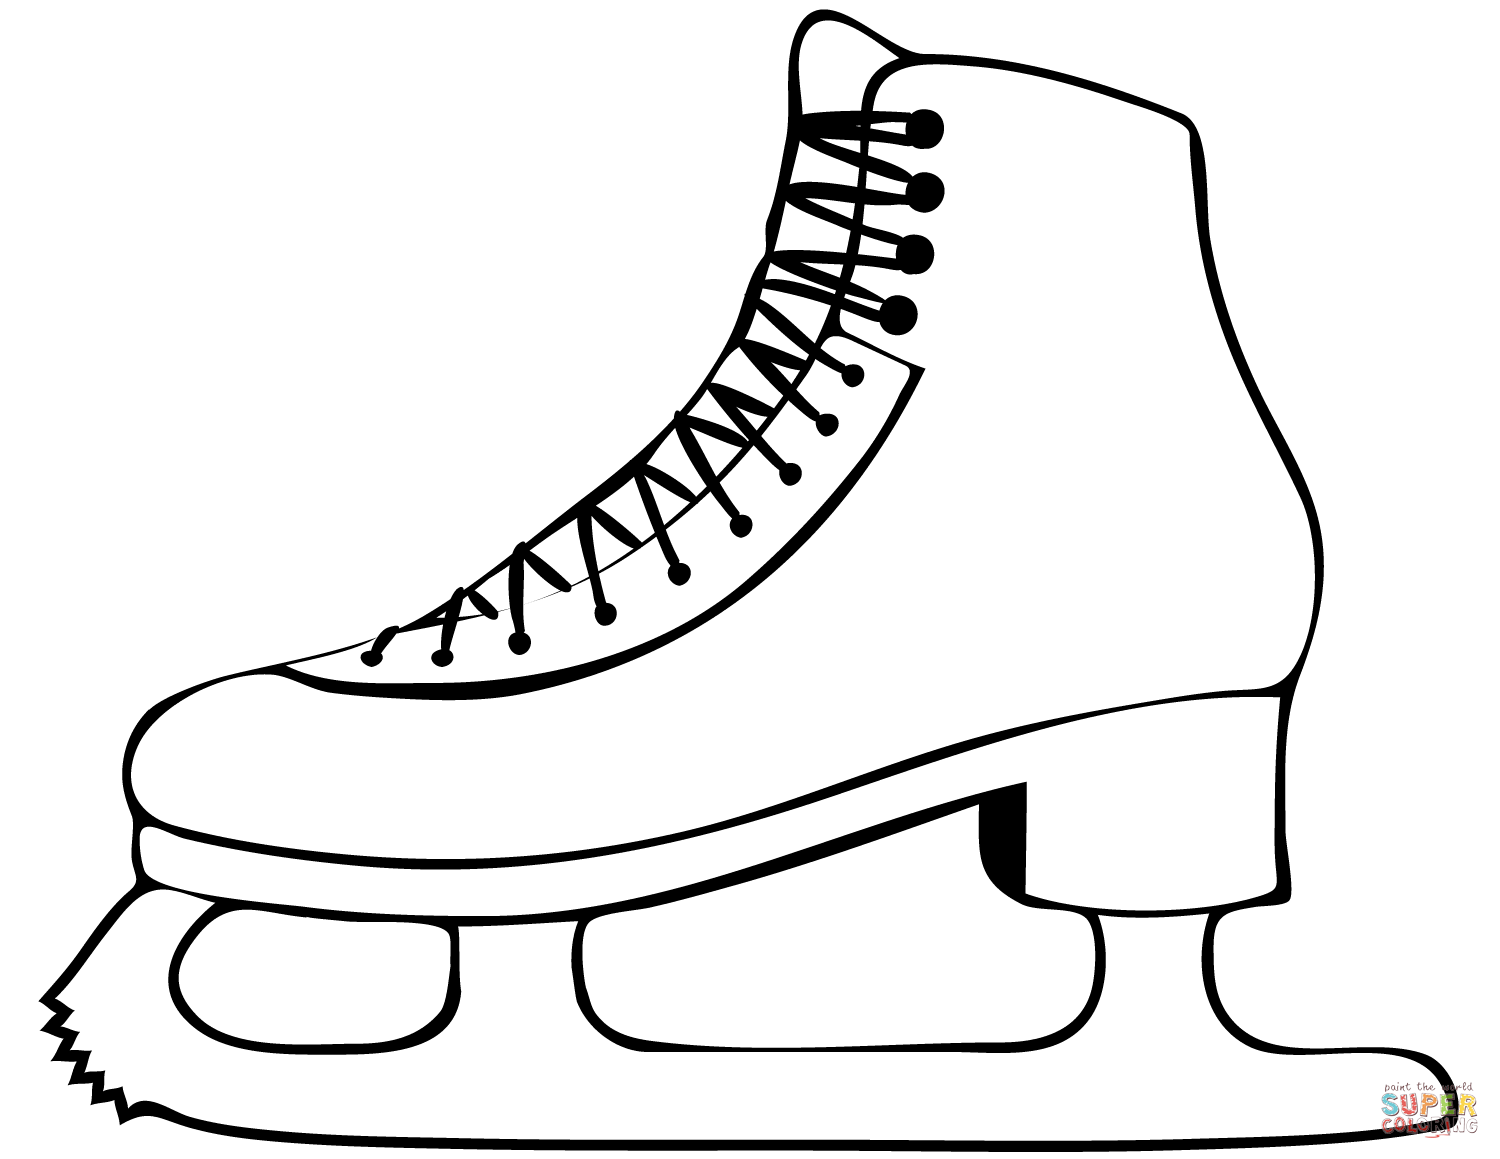 Ice skate coloring page free printable coloring pages